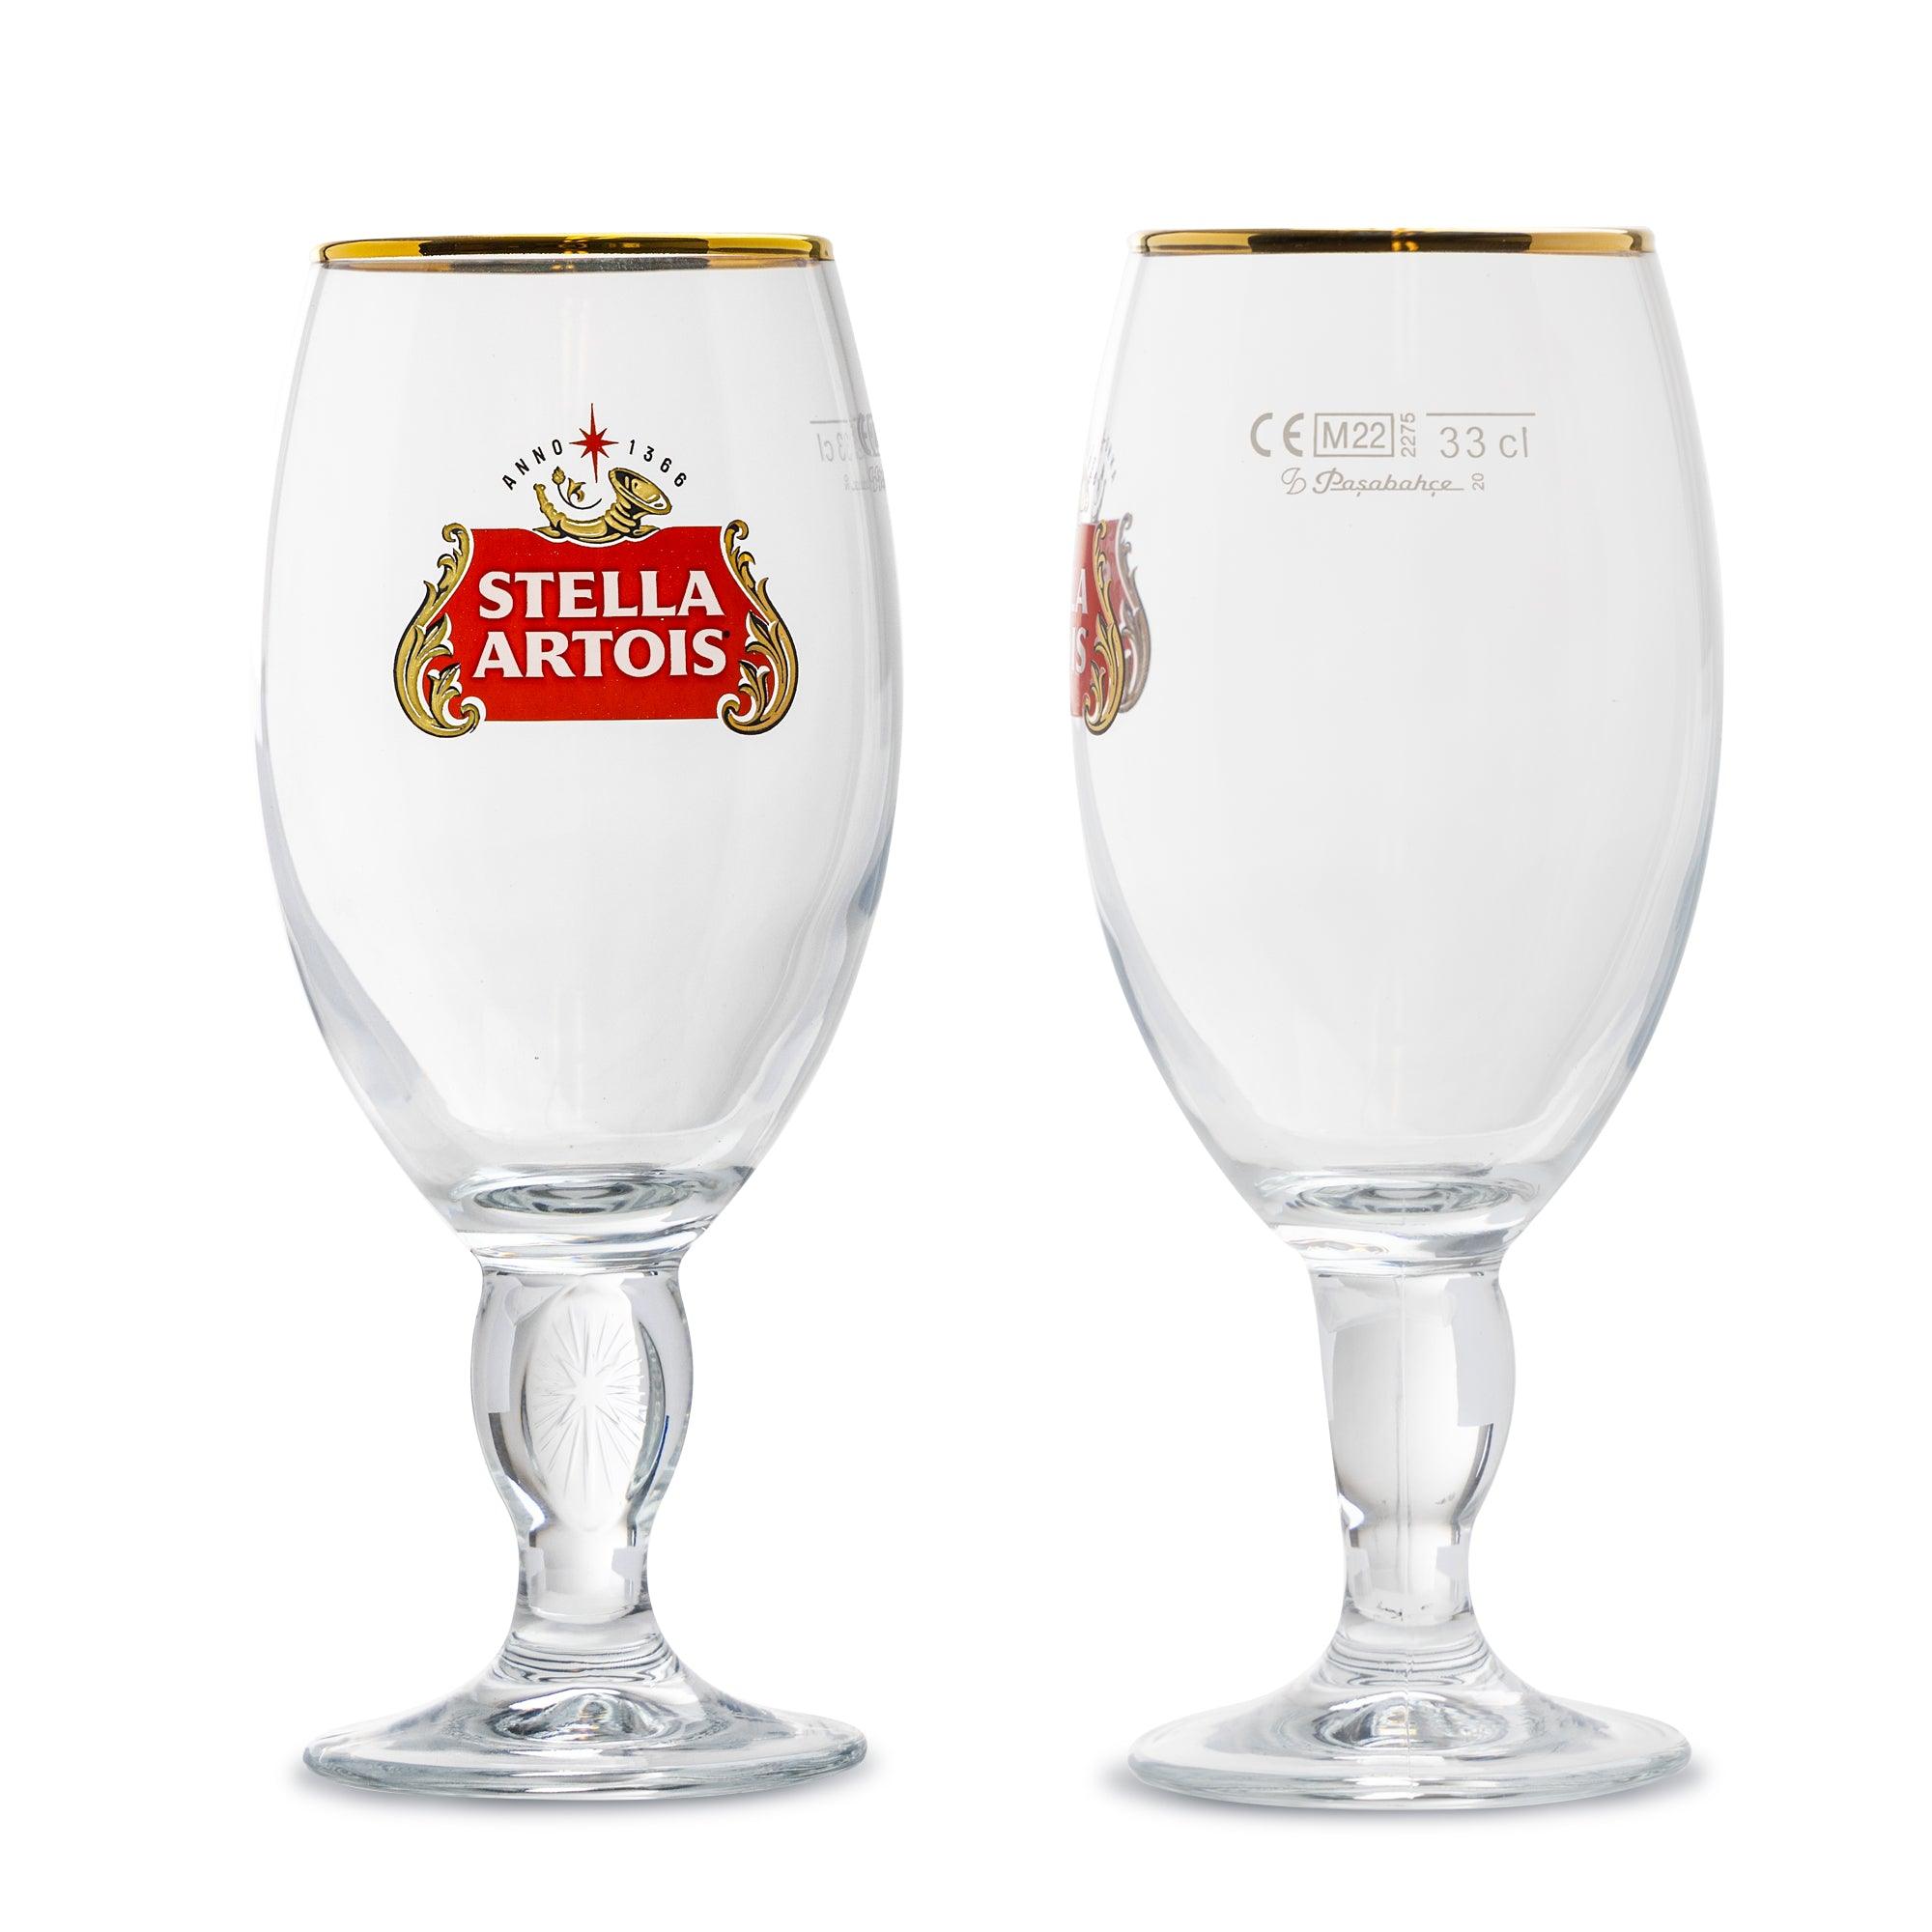 STELLA ARTOIS Star Chalice Set of 4 Beer Glasses Breweriana Free Shipping 